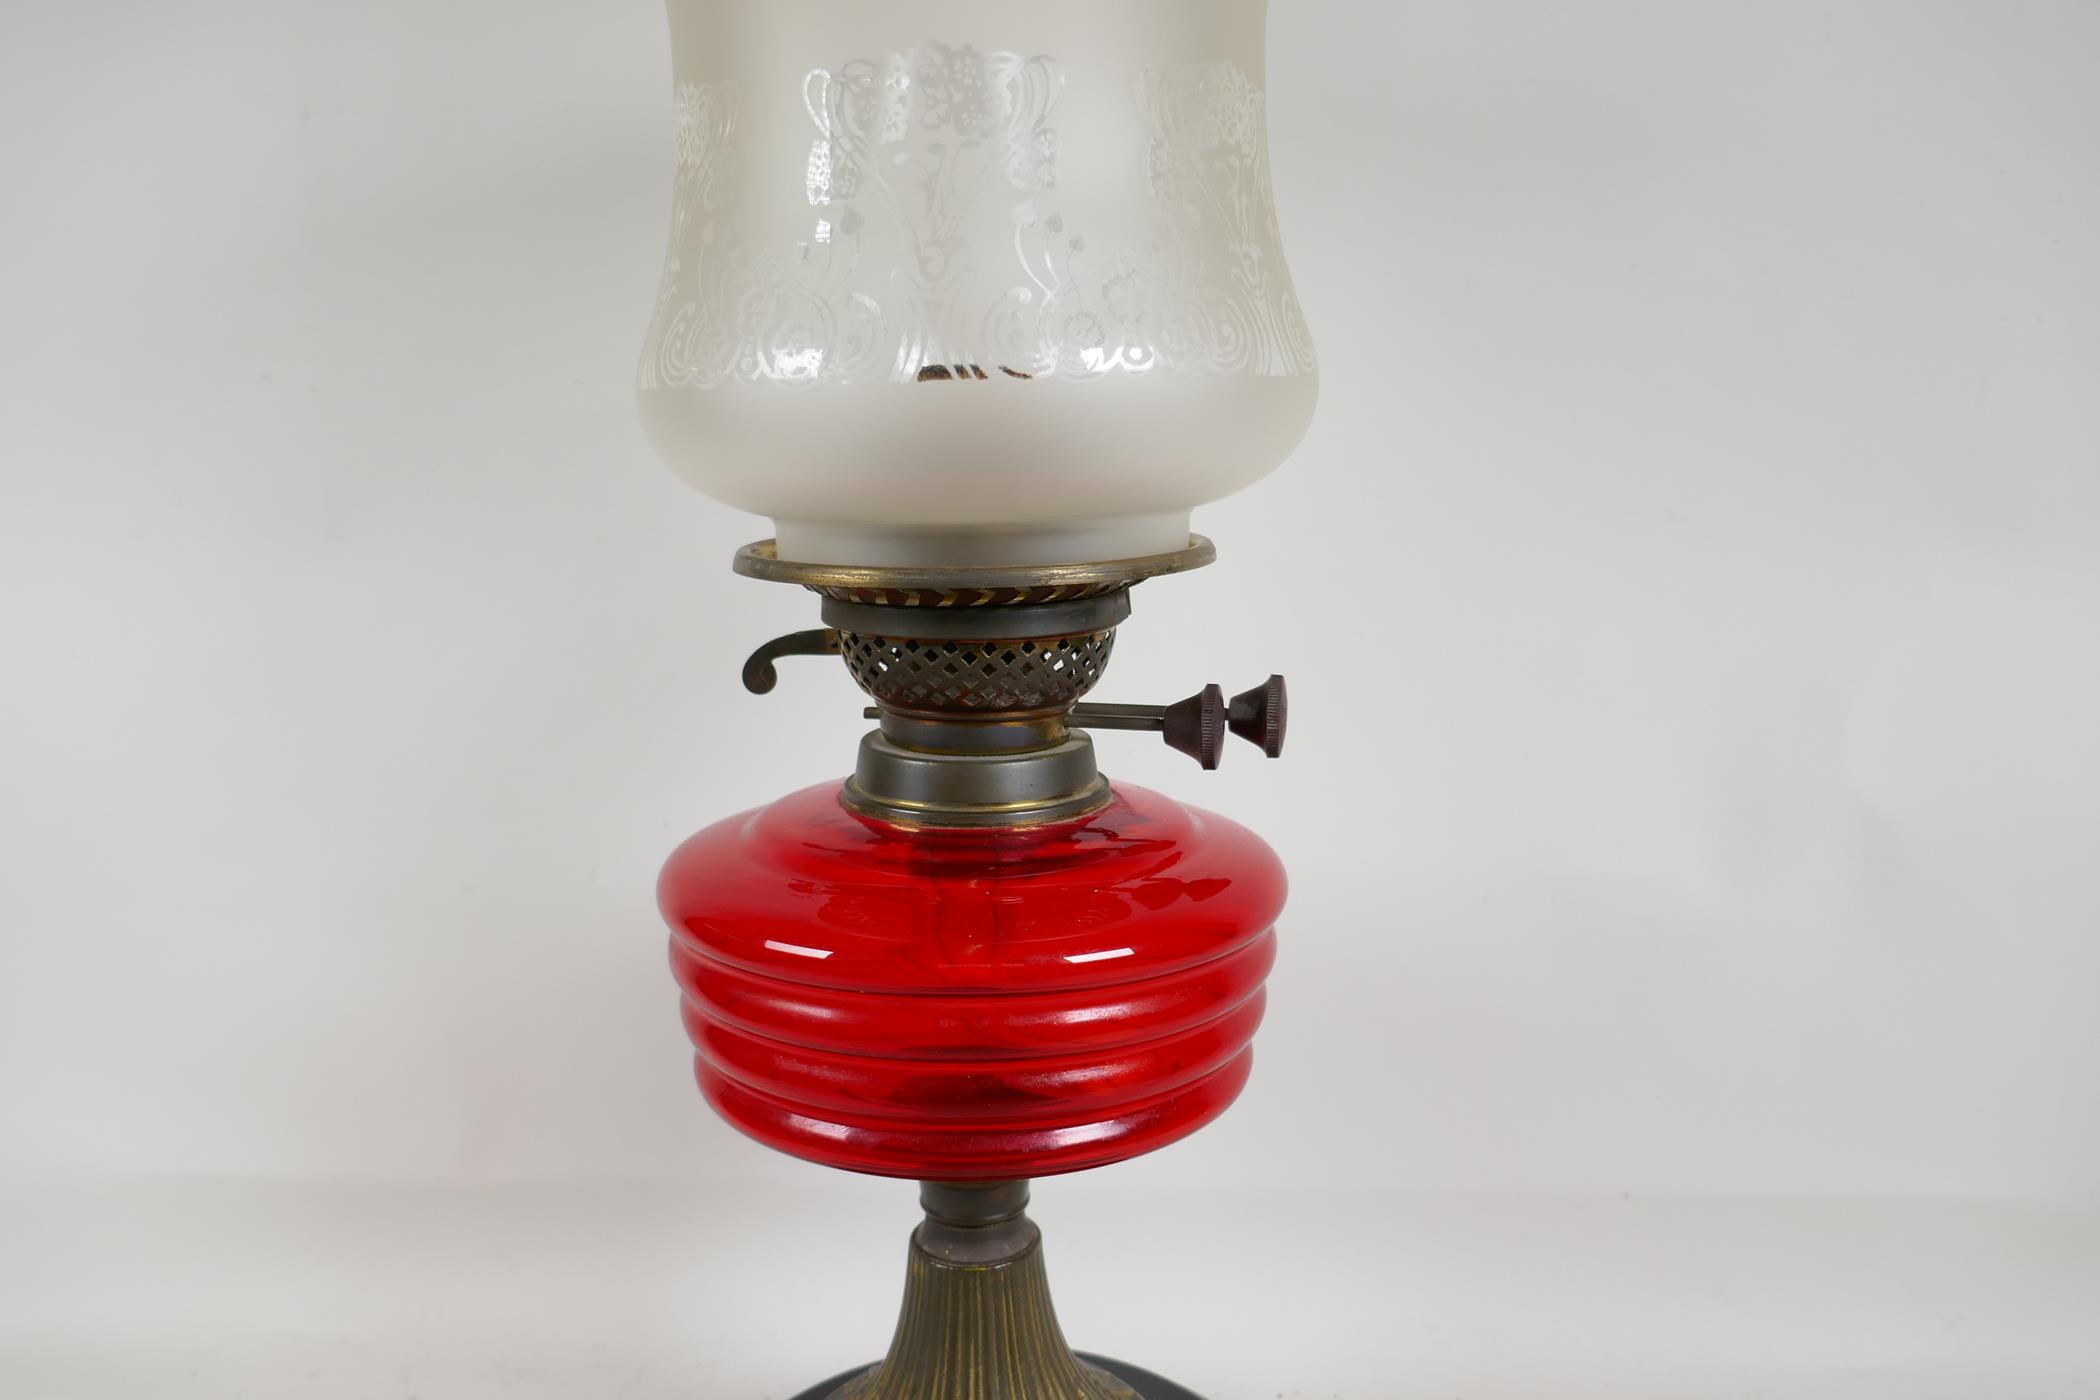 A C19th brass and glass oil lamp with cranberry glass shade, 21" high - Image 2 of 4